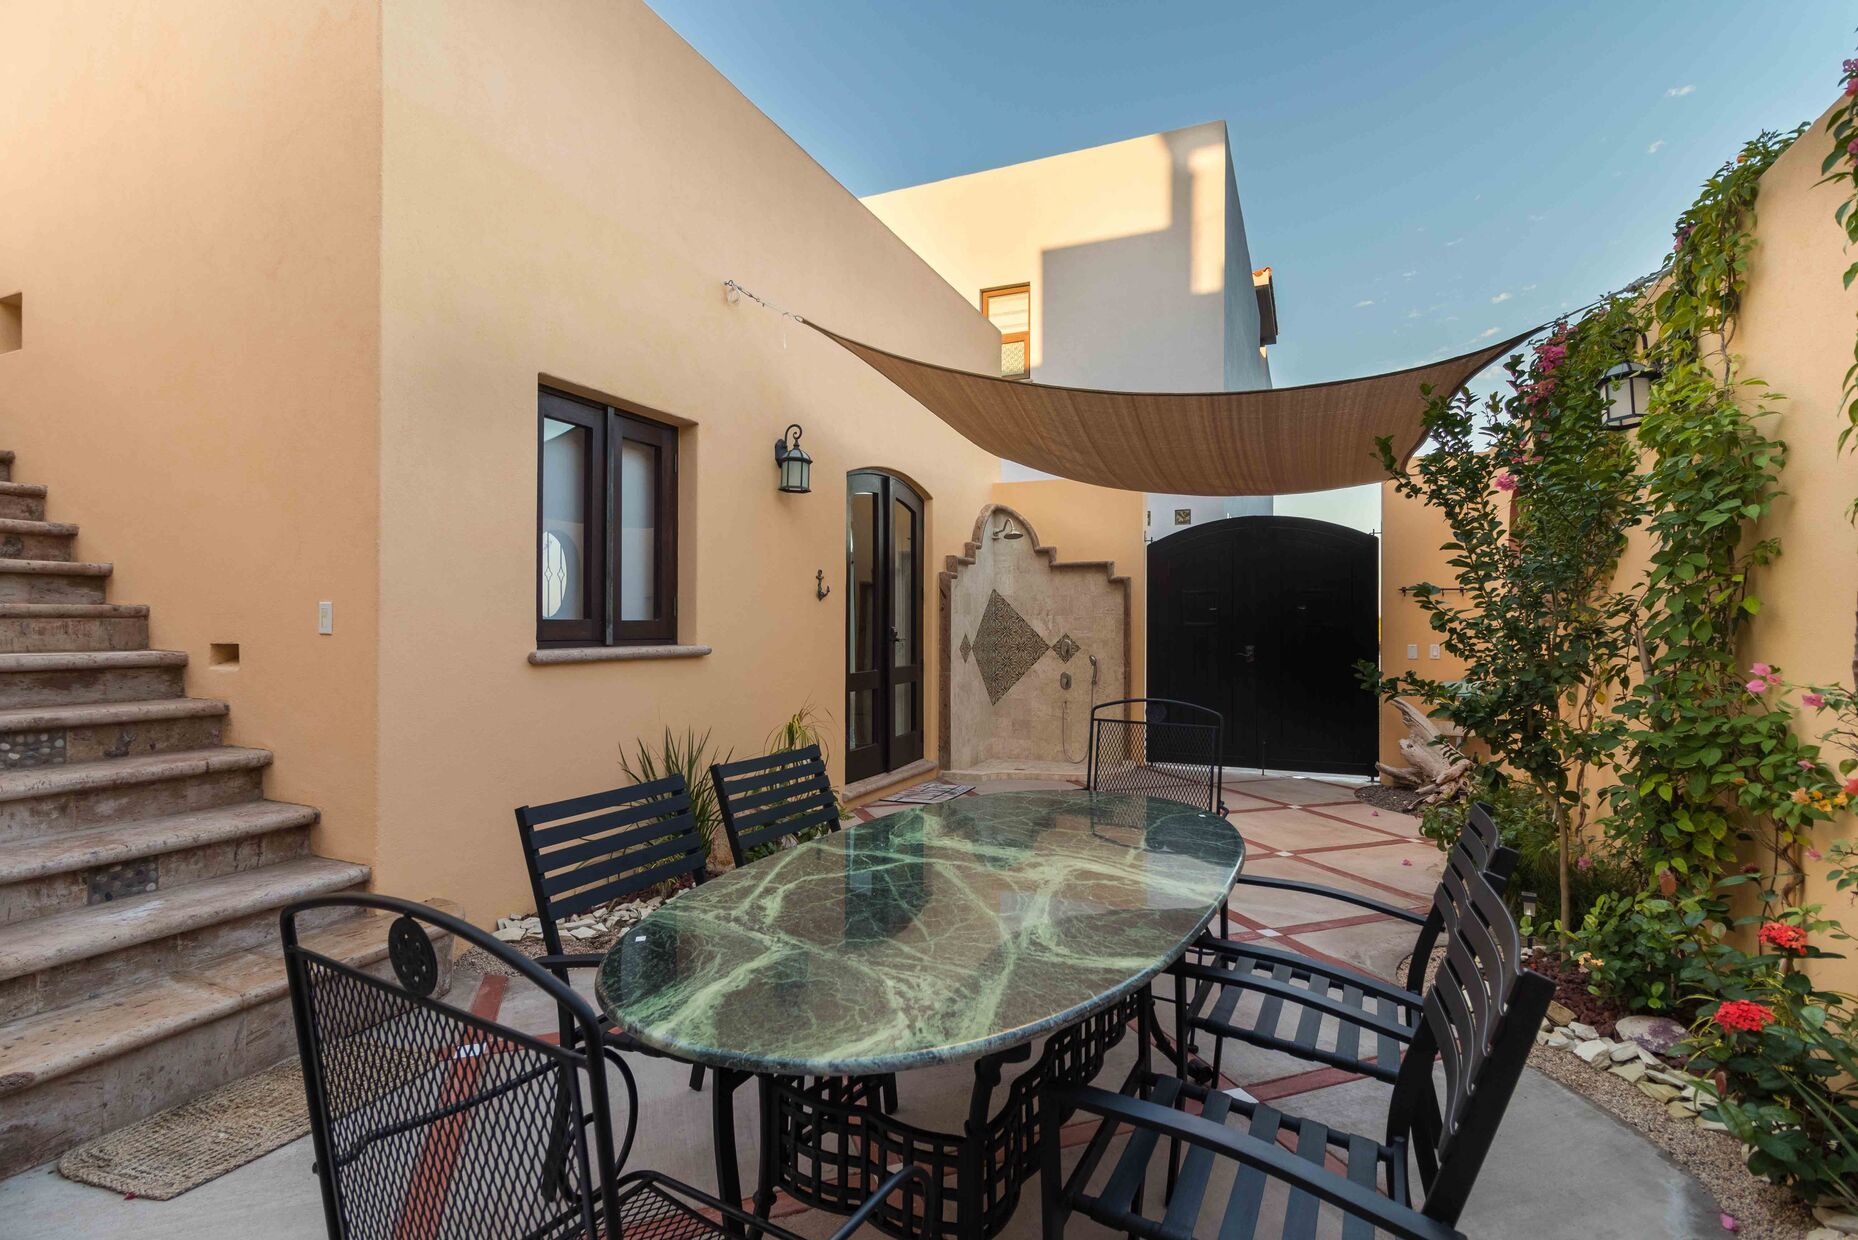 Outdoor shower, and double rear gates for access to the beach and community plaza next door.